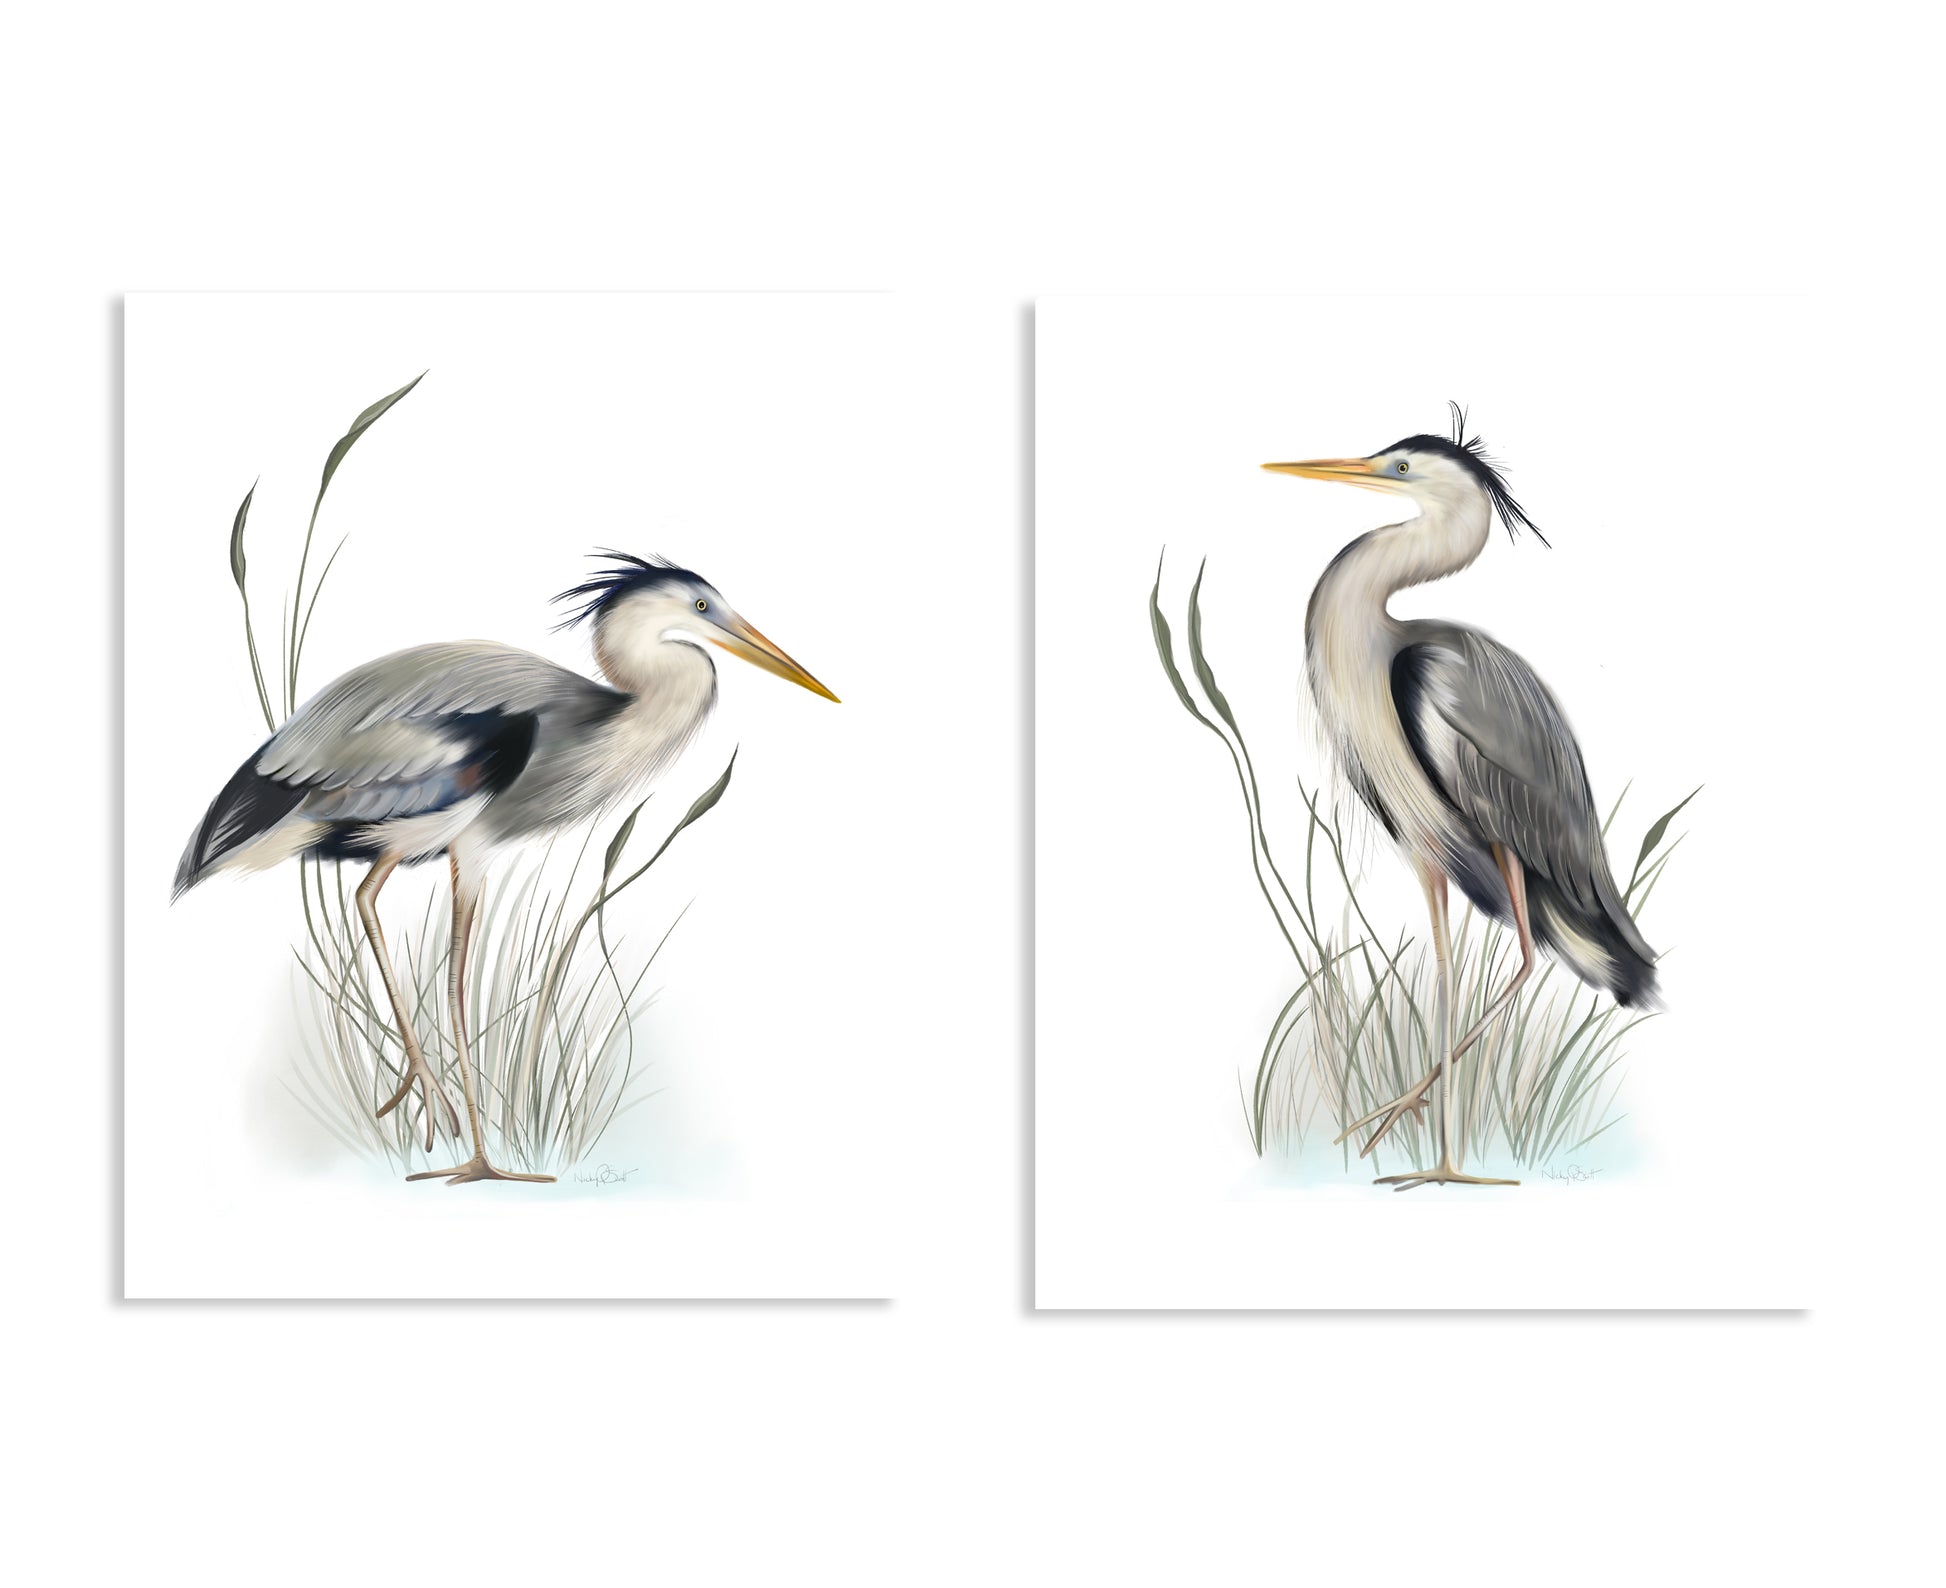 Set of 2 Great Blue Heron Birds in tall grasses art illustration prints on white backgrounds with a shadow - Studio Q - Art by Nicky Quartermaine Scott